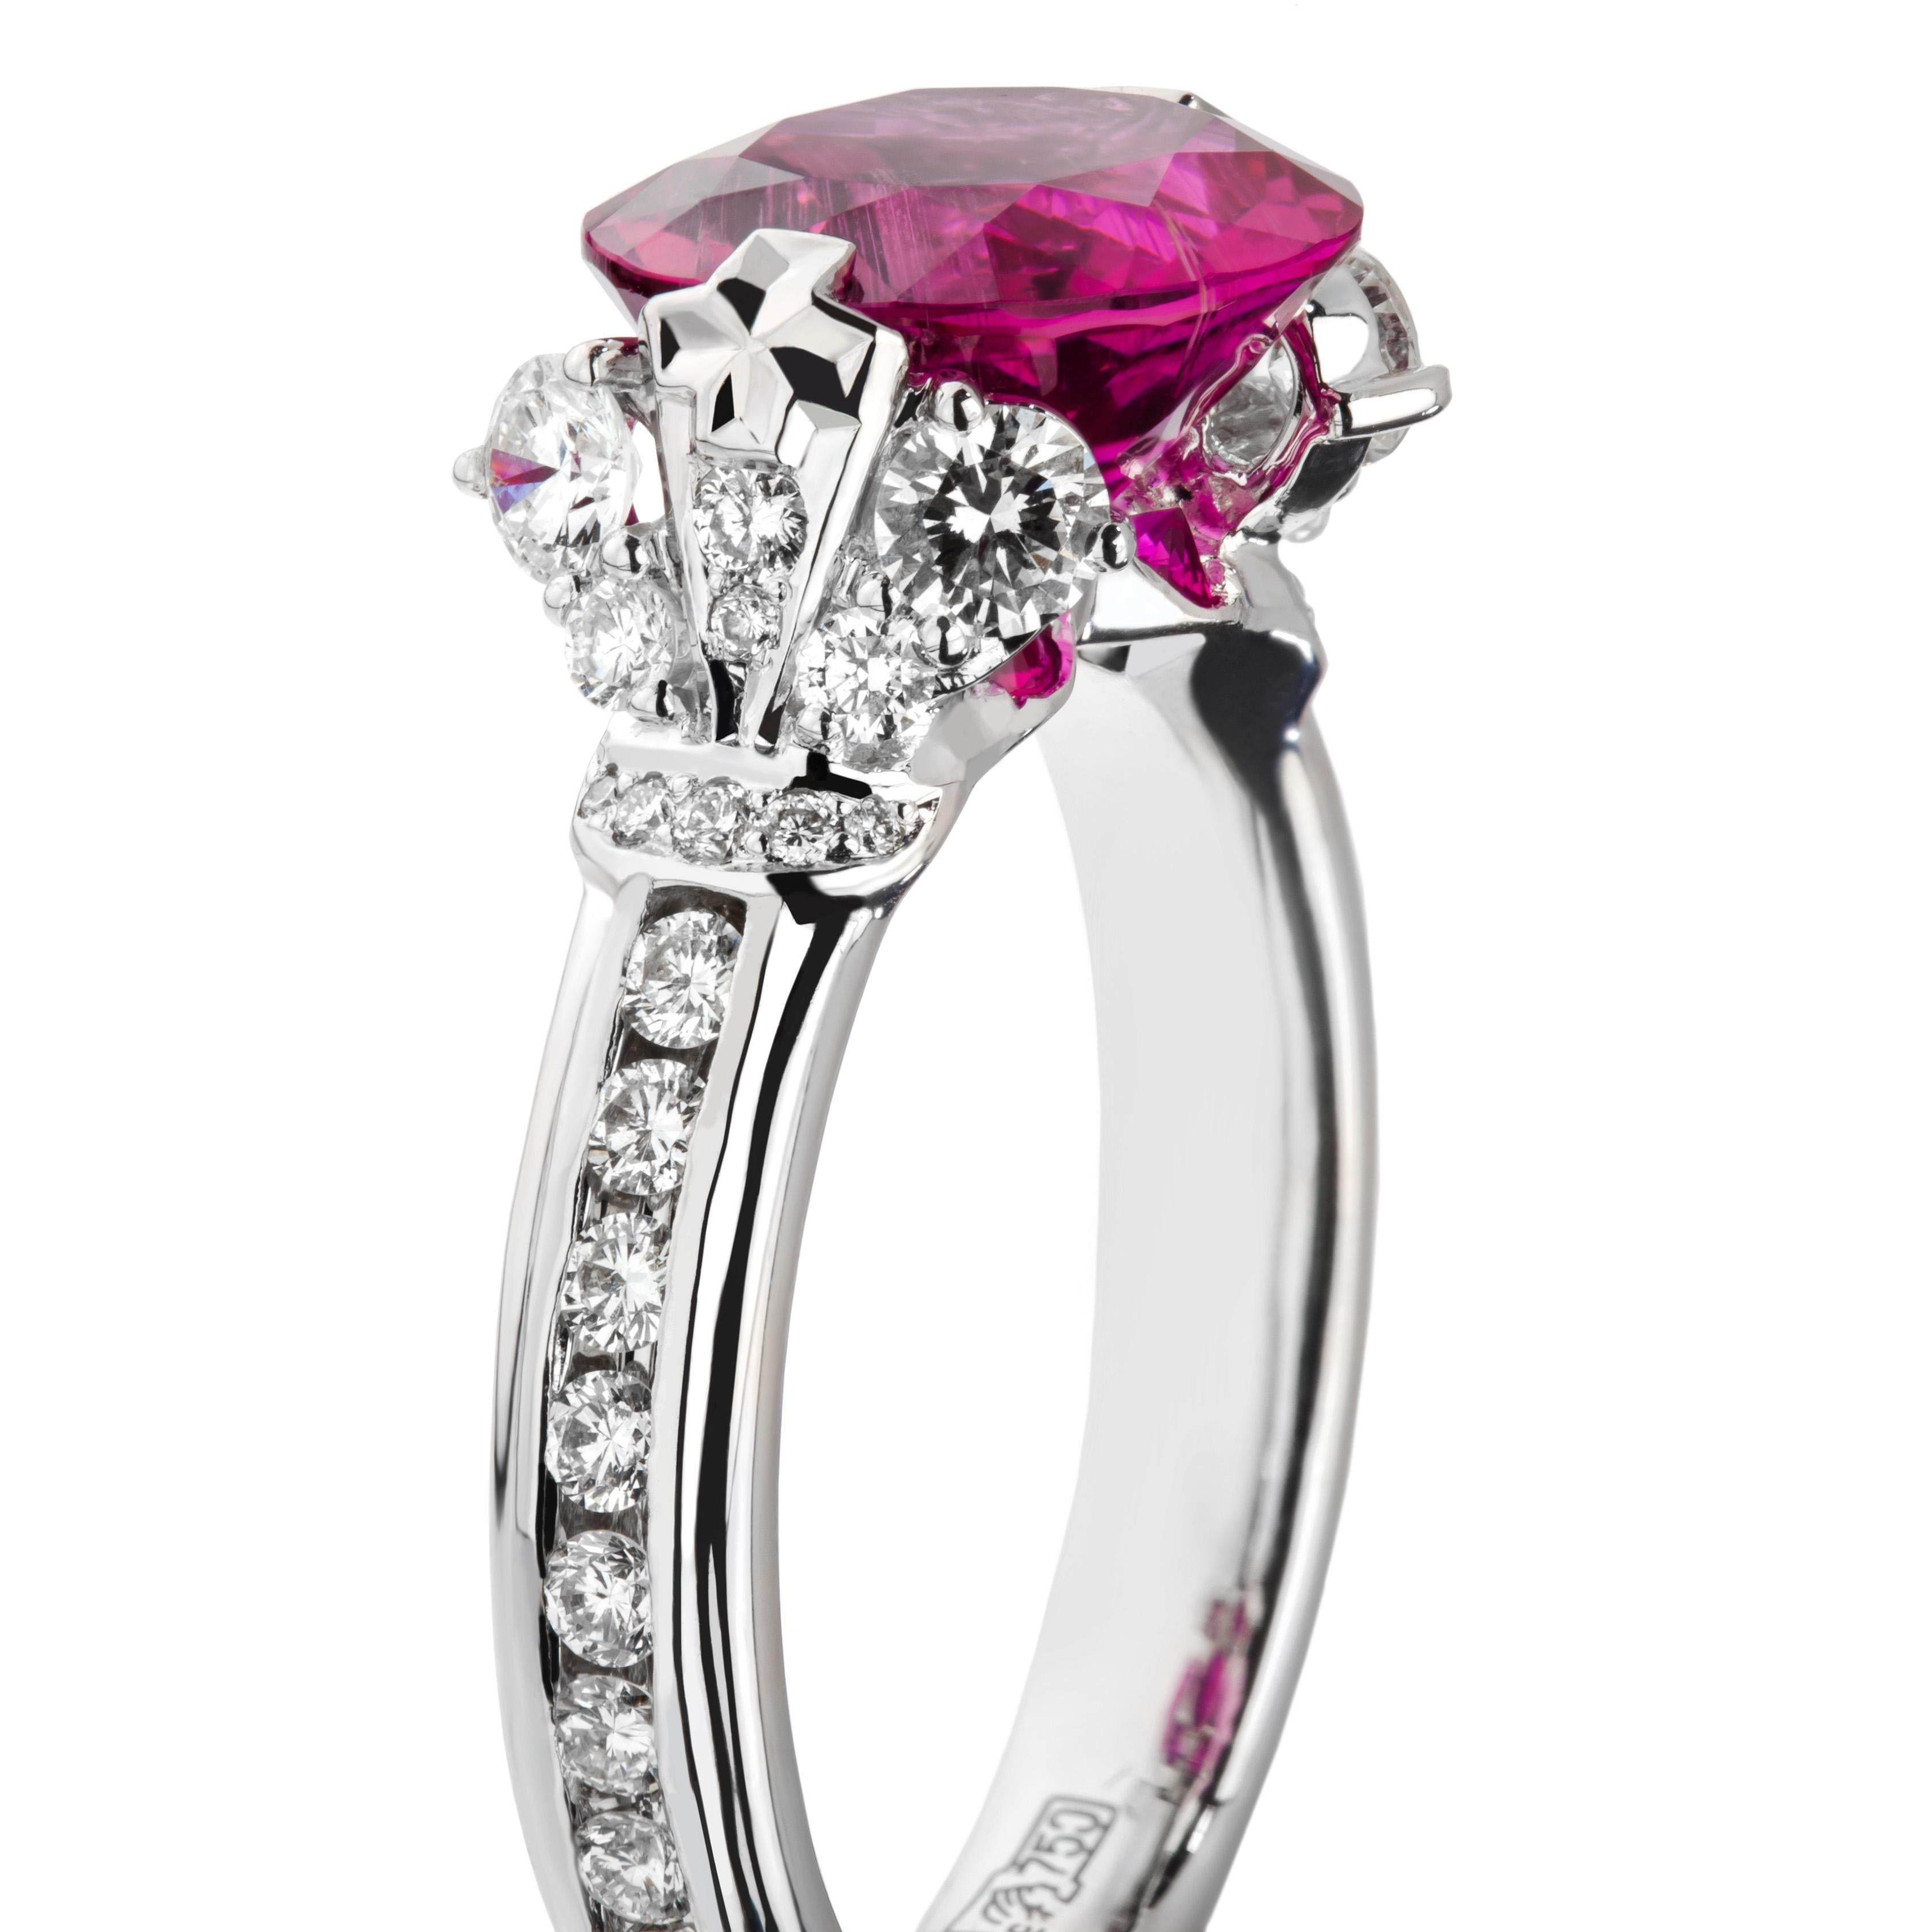 Elegant and classic, the ring made of diamonds and a vivid rubellite tourmaline, is inspired by the splendid period of Russian and Europe. Dedicated for the Imperial greatness, luxury, beauty, and noble aspiration, the crown shaped earrings from